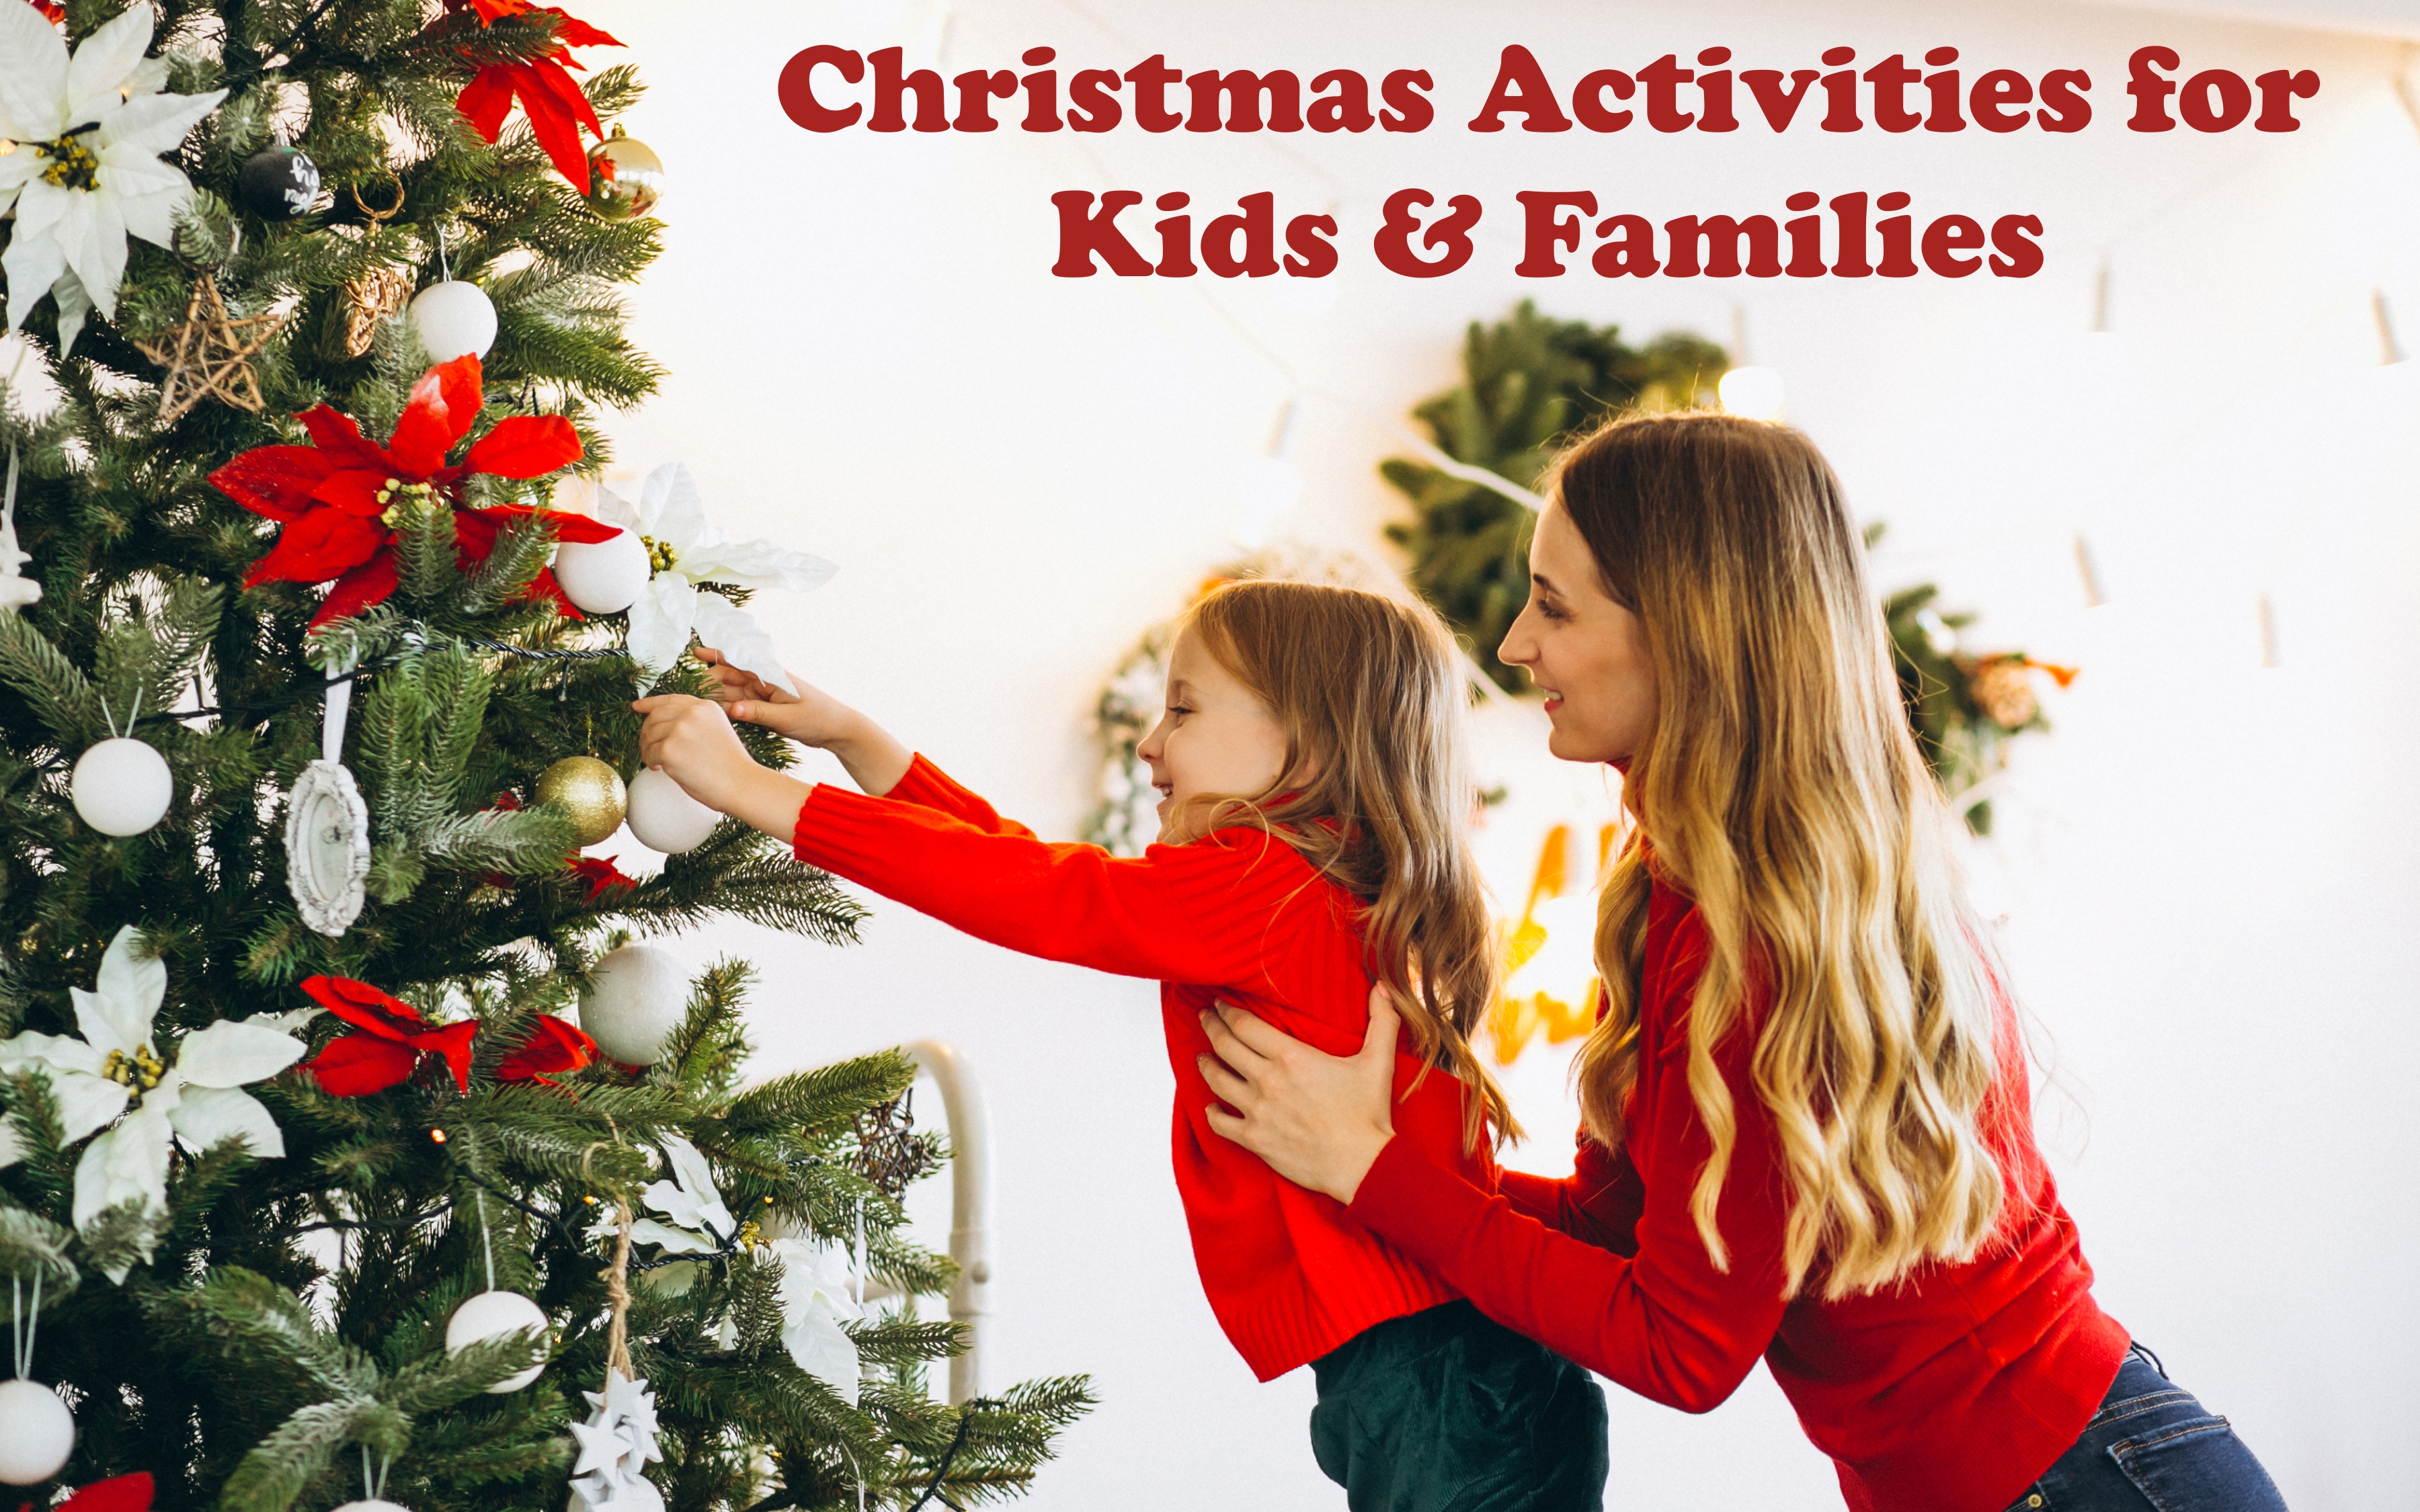 Christmas activites for kids and families